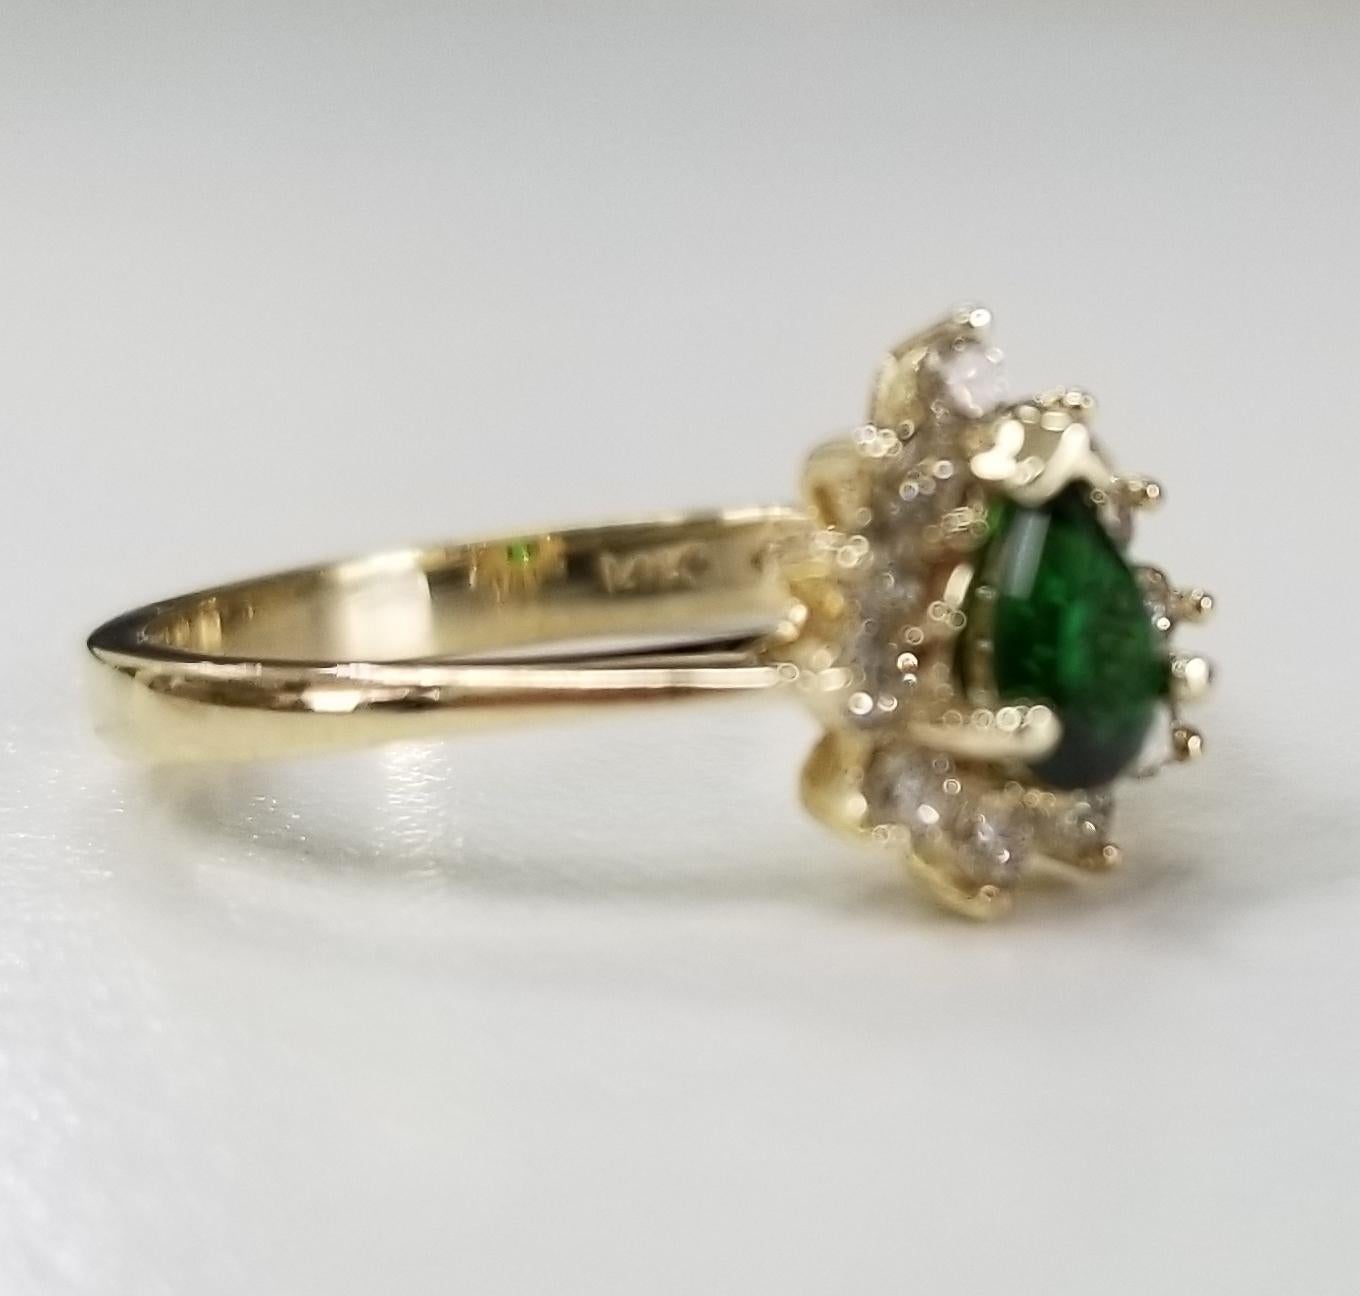 14k yellow gold Green Tourmaline and diamond ring, containing 1 pear shape cut tourmaline weighing .33pts. and 11 round full cut diamonds of very fine quality weighing .25pts.  This ring is a size 5 but we will size to fit for free.